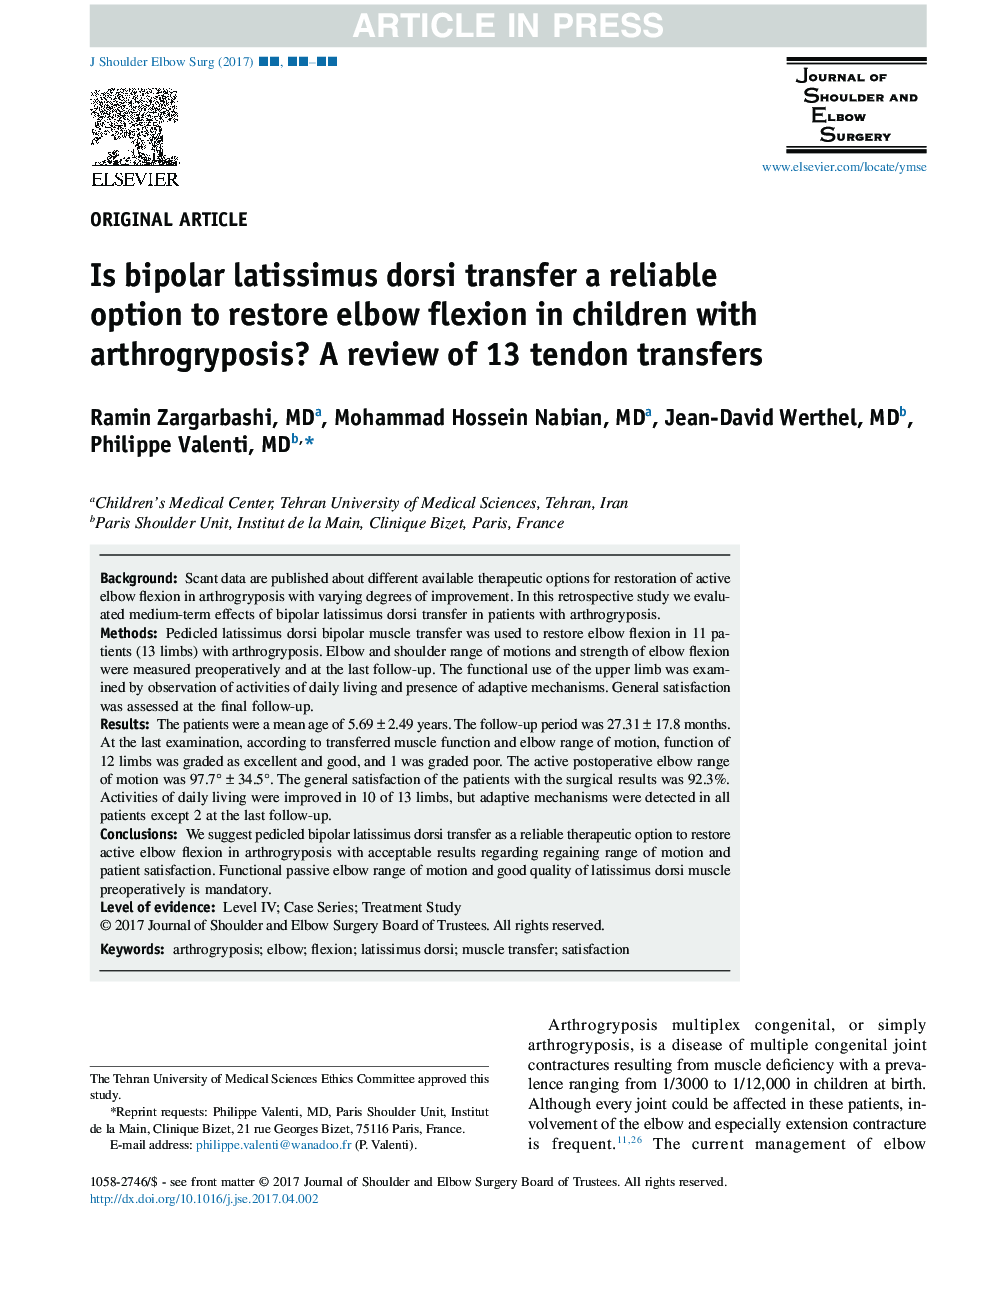 Is bipolar latissimus dorsi transfer a reliable option to restore elbow flexion in children with arthrogryposis? A review of 13 tendon transfers